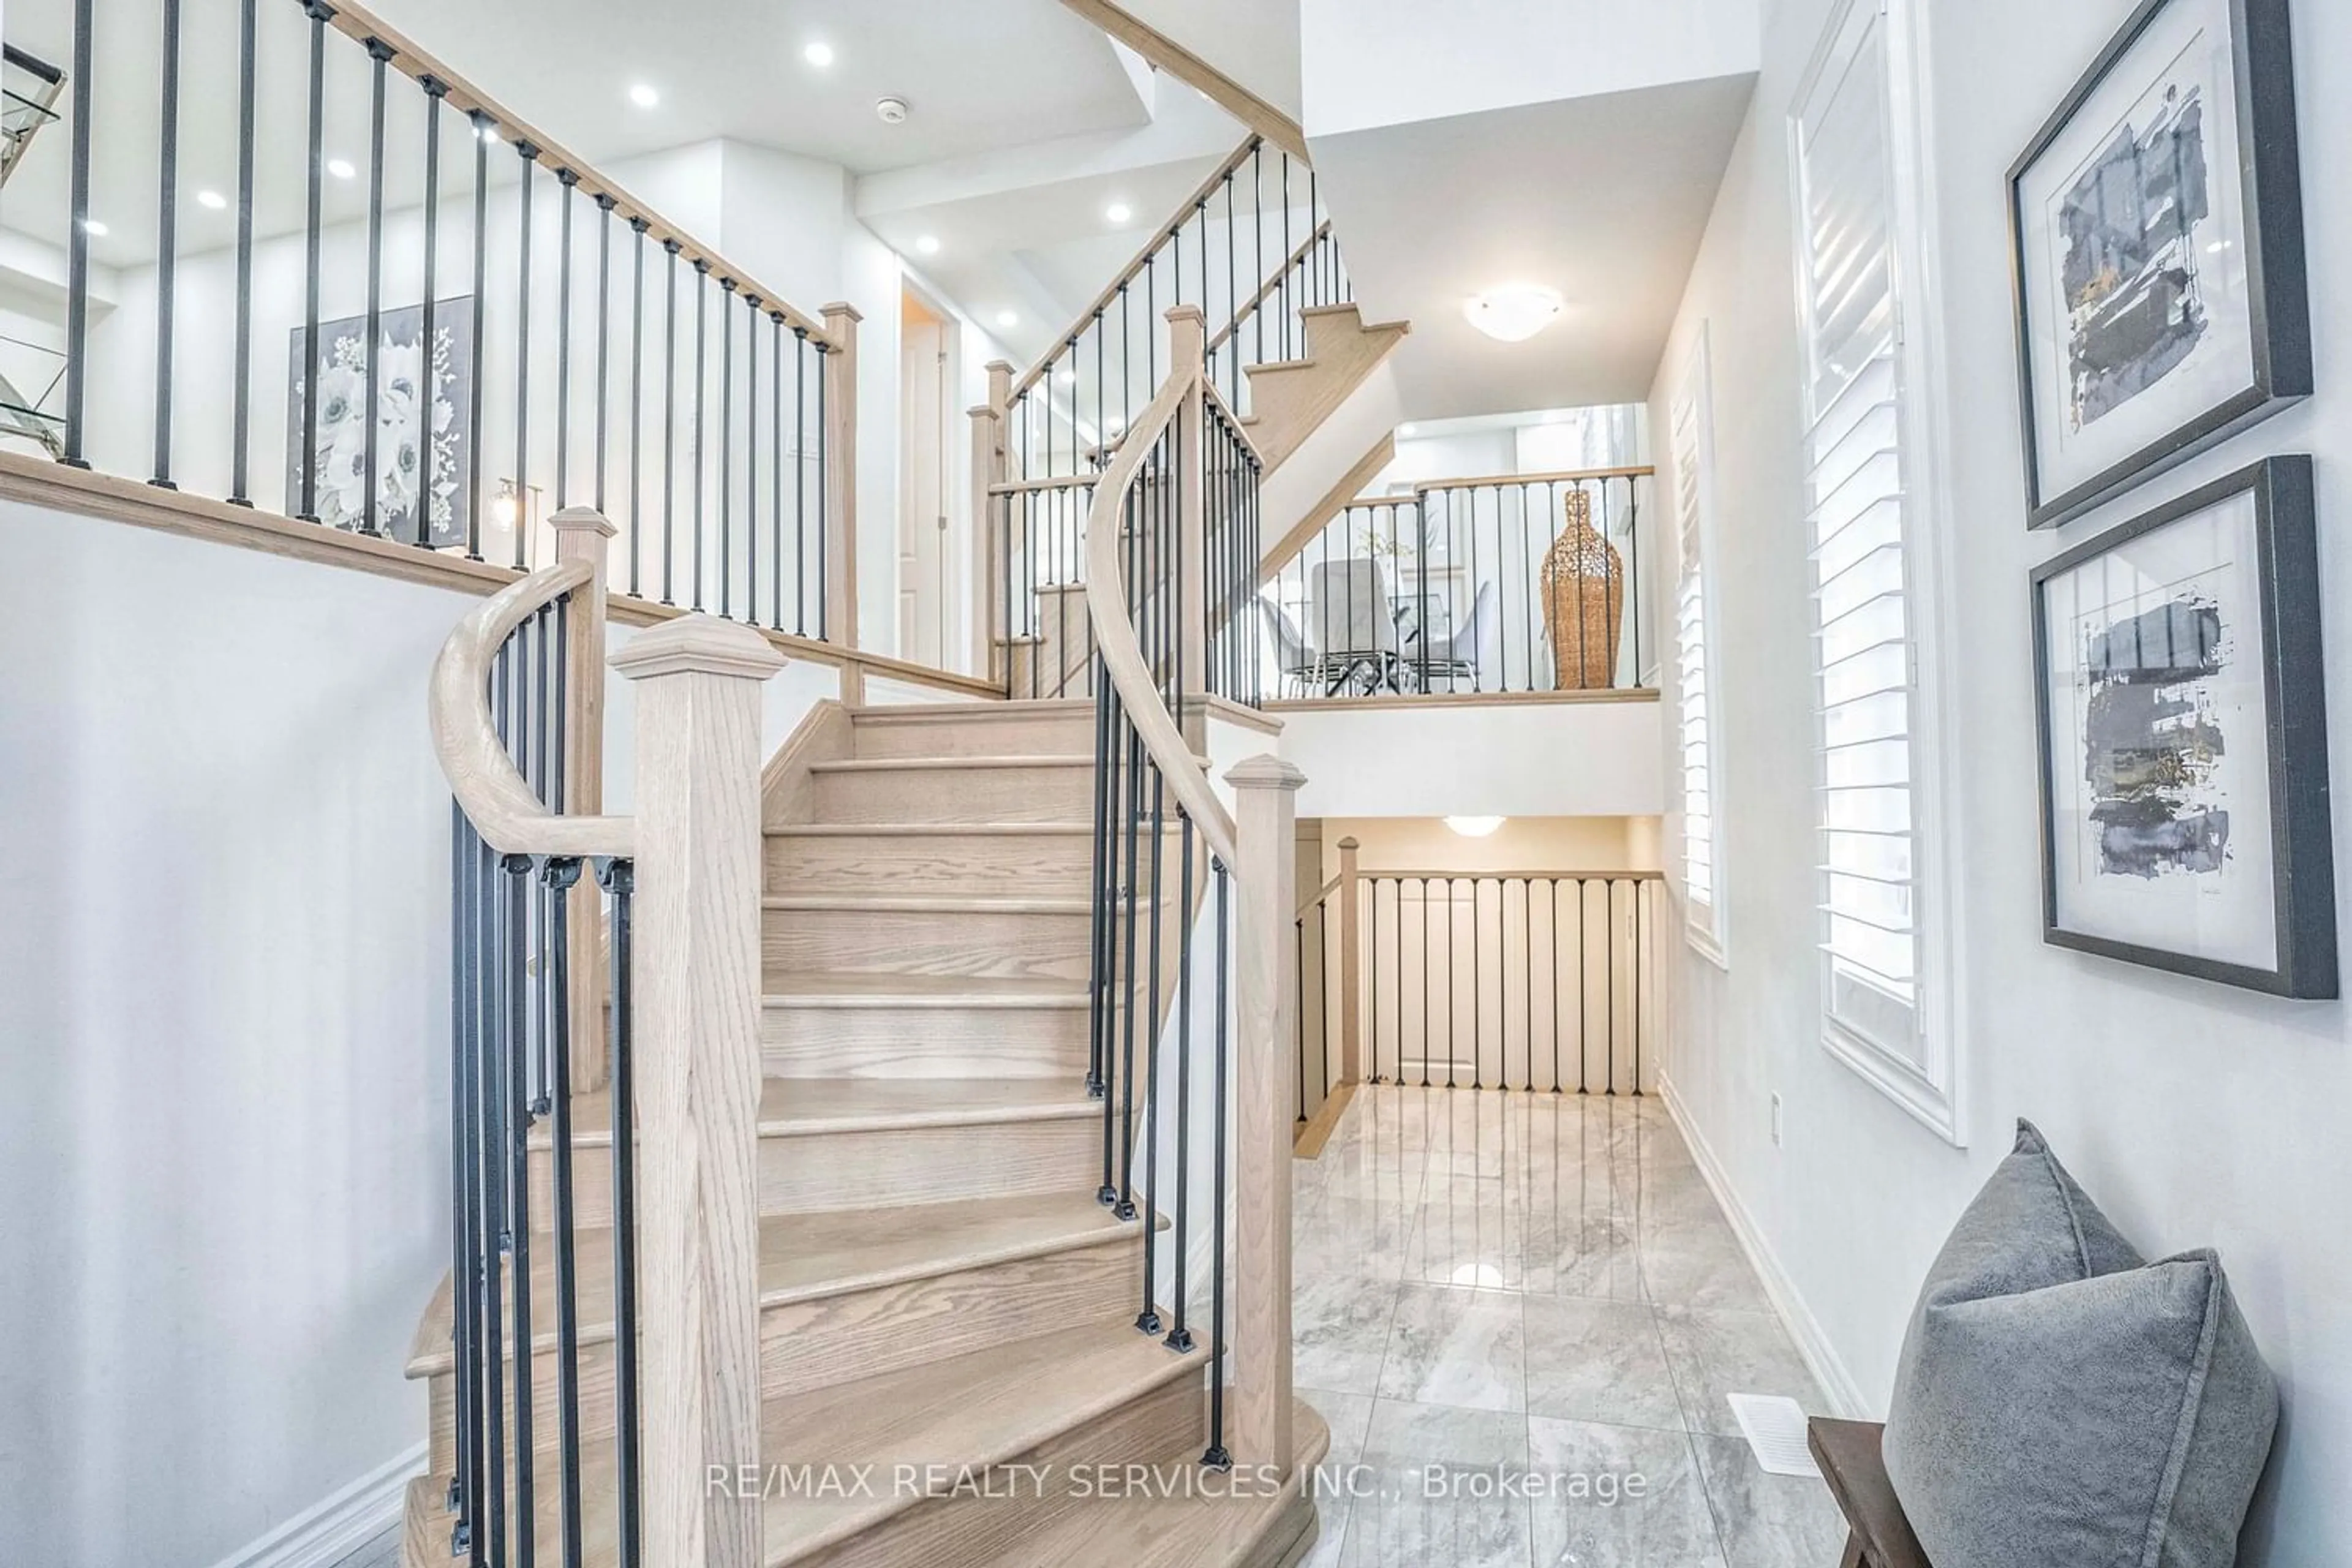 Stairs for 574 Queen Mary Dr, Brampton Ontario L7A 4Y6